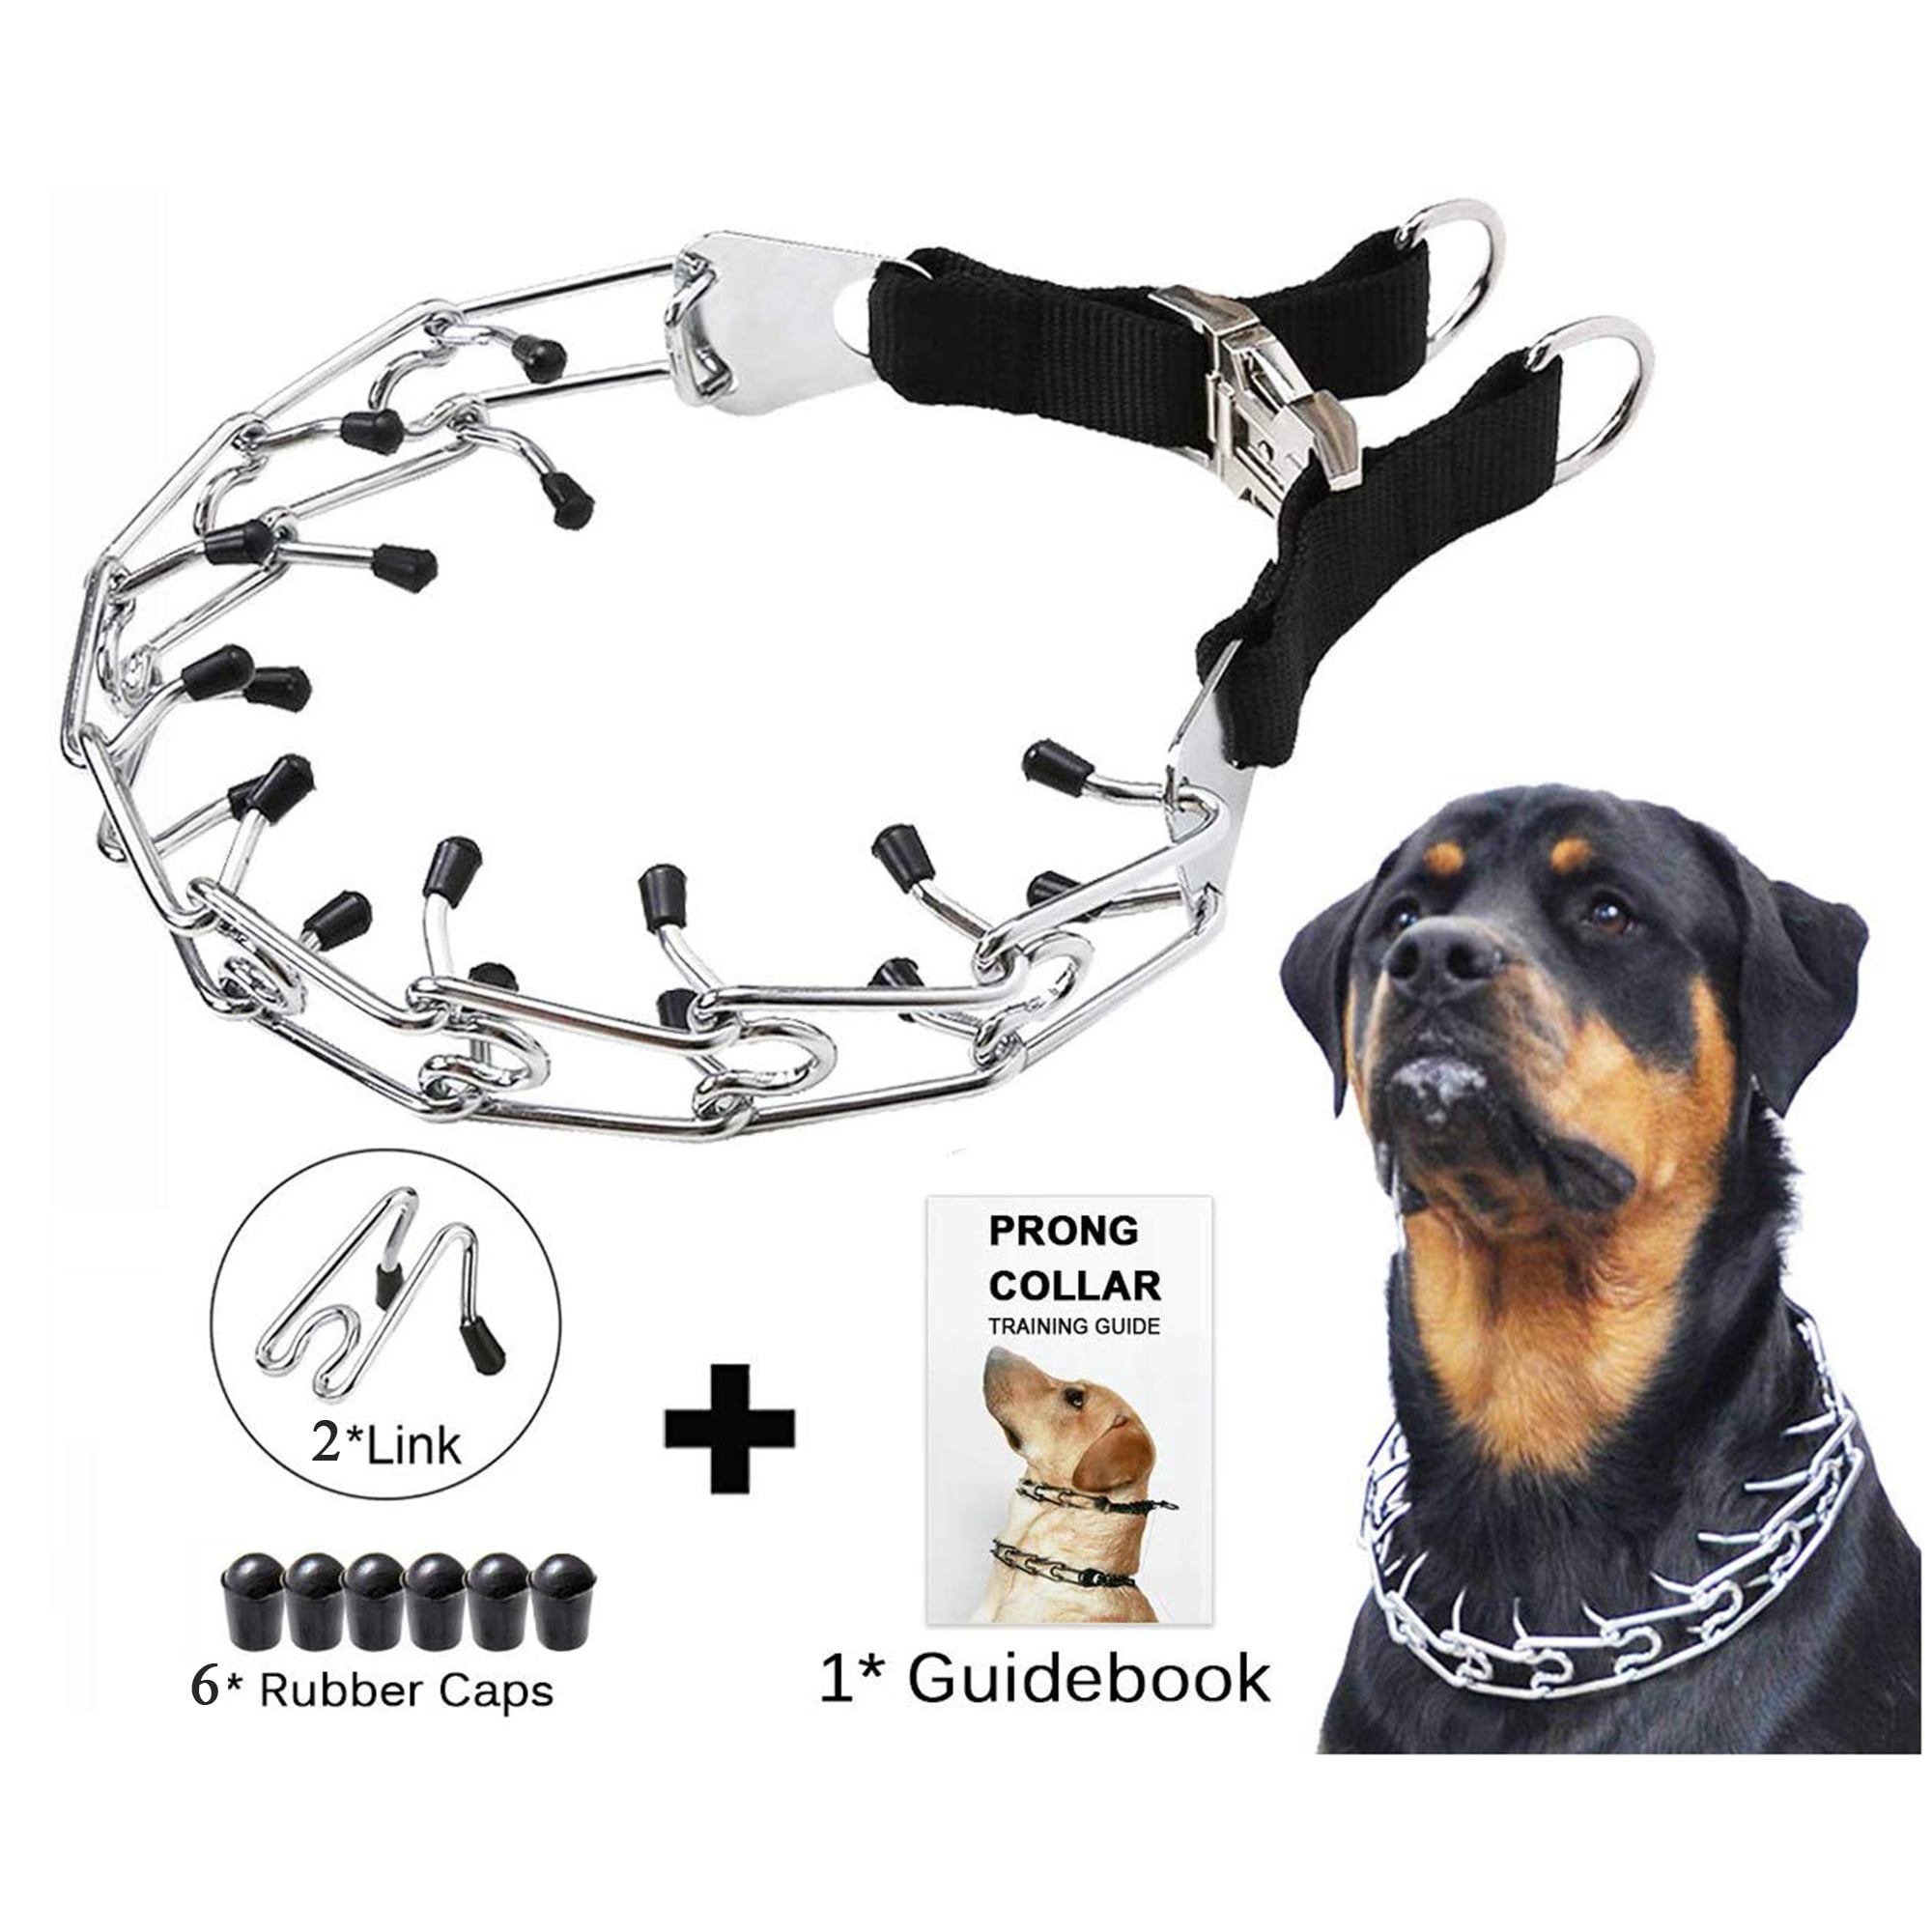 Classic Stainless Steel Choke Pinch Dog Chain Collar with Comfort Tips 5 Mayerzon Dog Prong Collar 